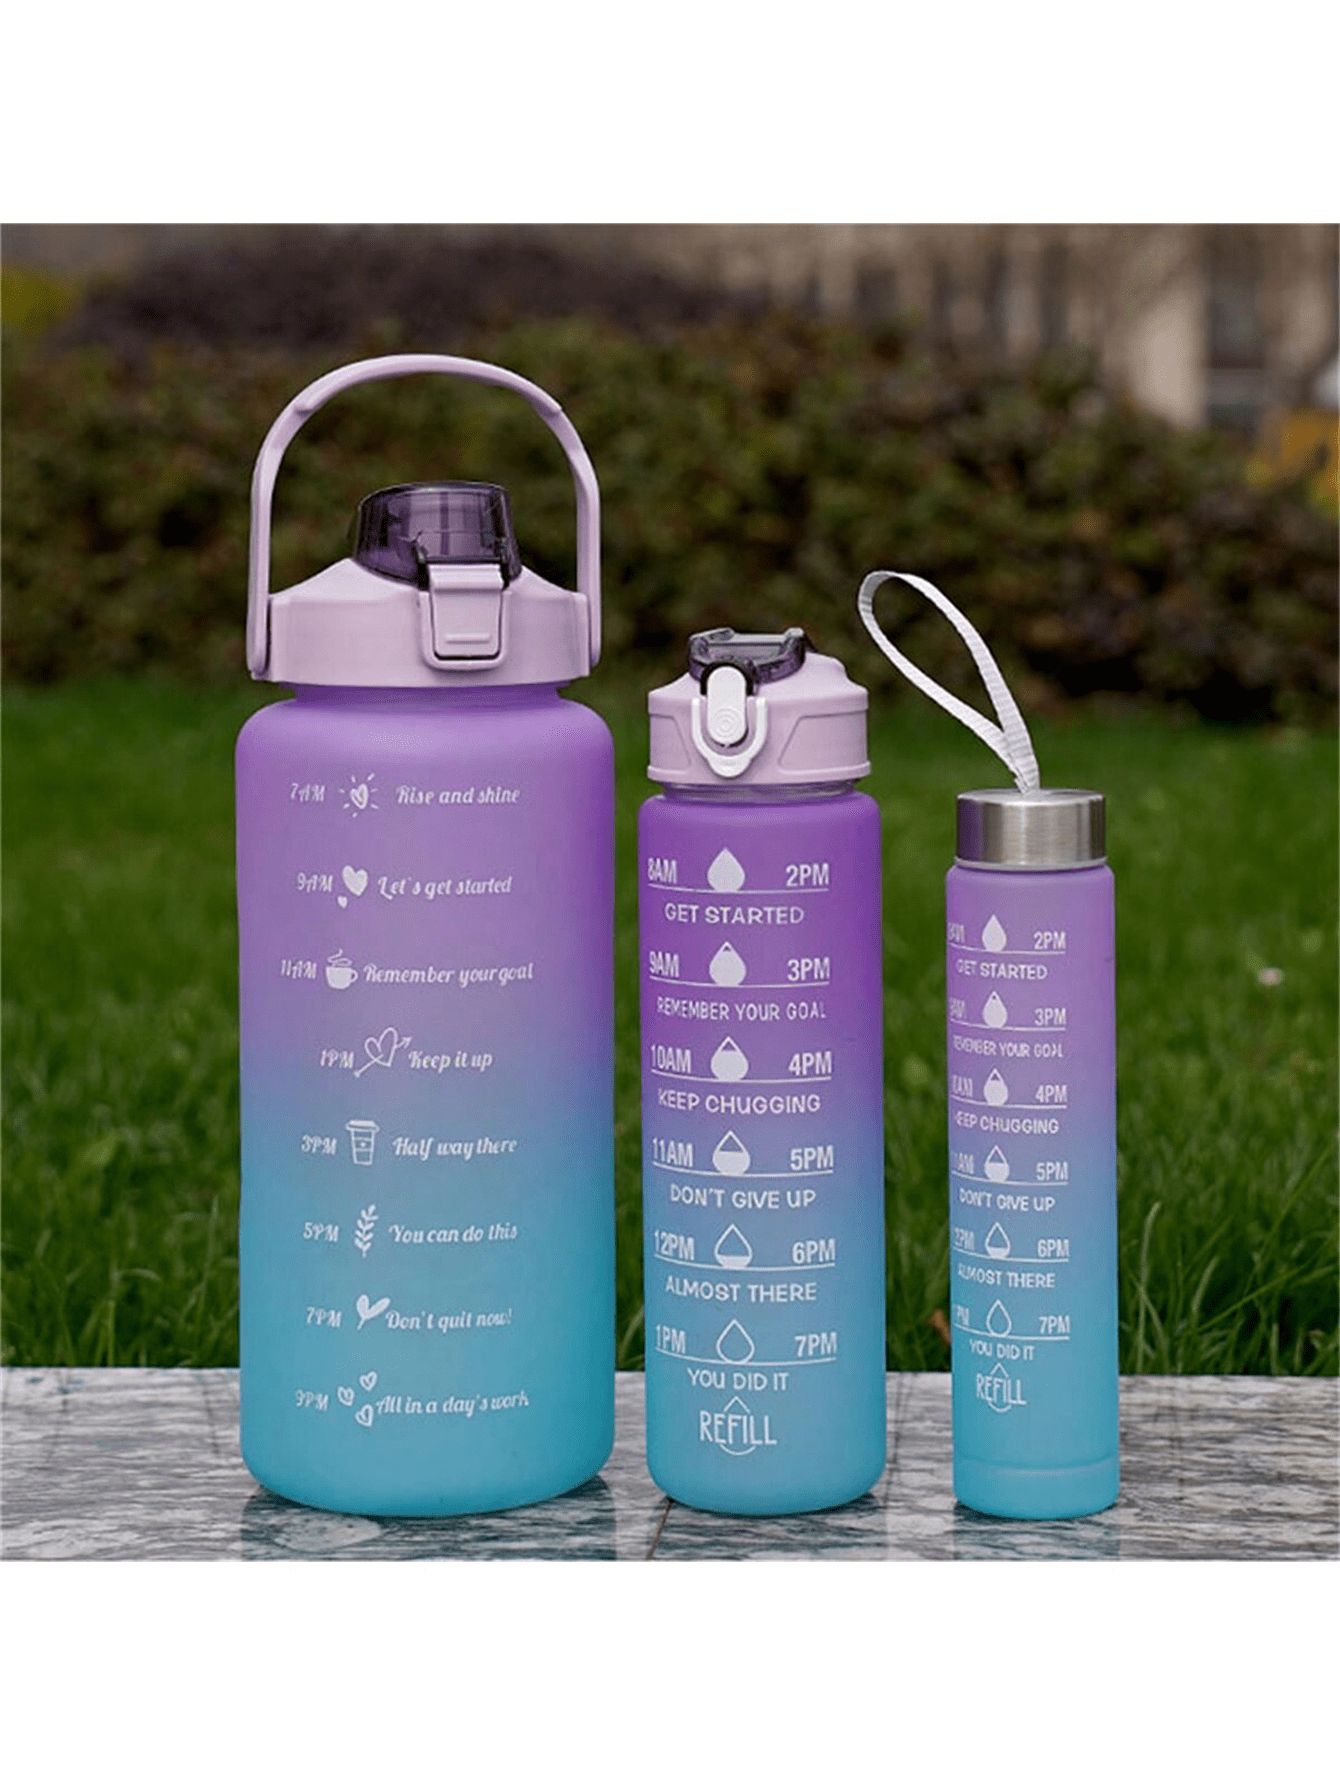 3-color gradient set of water cups, a set of three sizes, outdoor sports plastic water cups, large-capacity insulated sports kettle. Suitable for outdoor hiking, camping, picnicking, running for exercise, and traveling, and more.